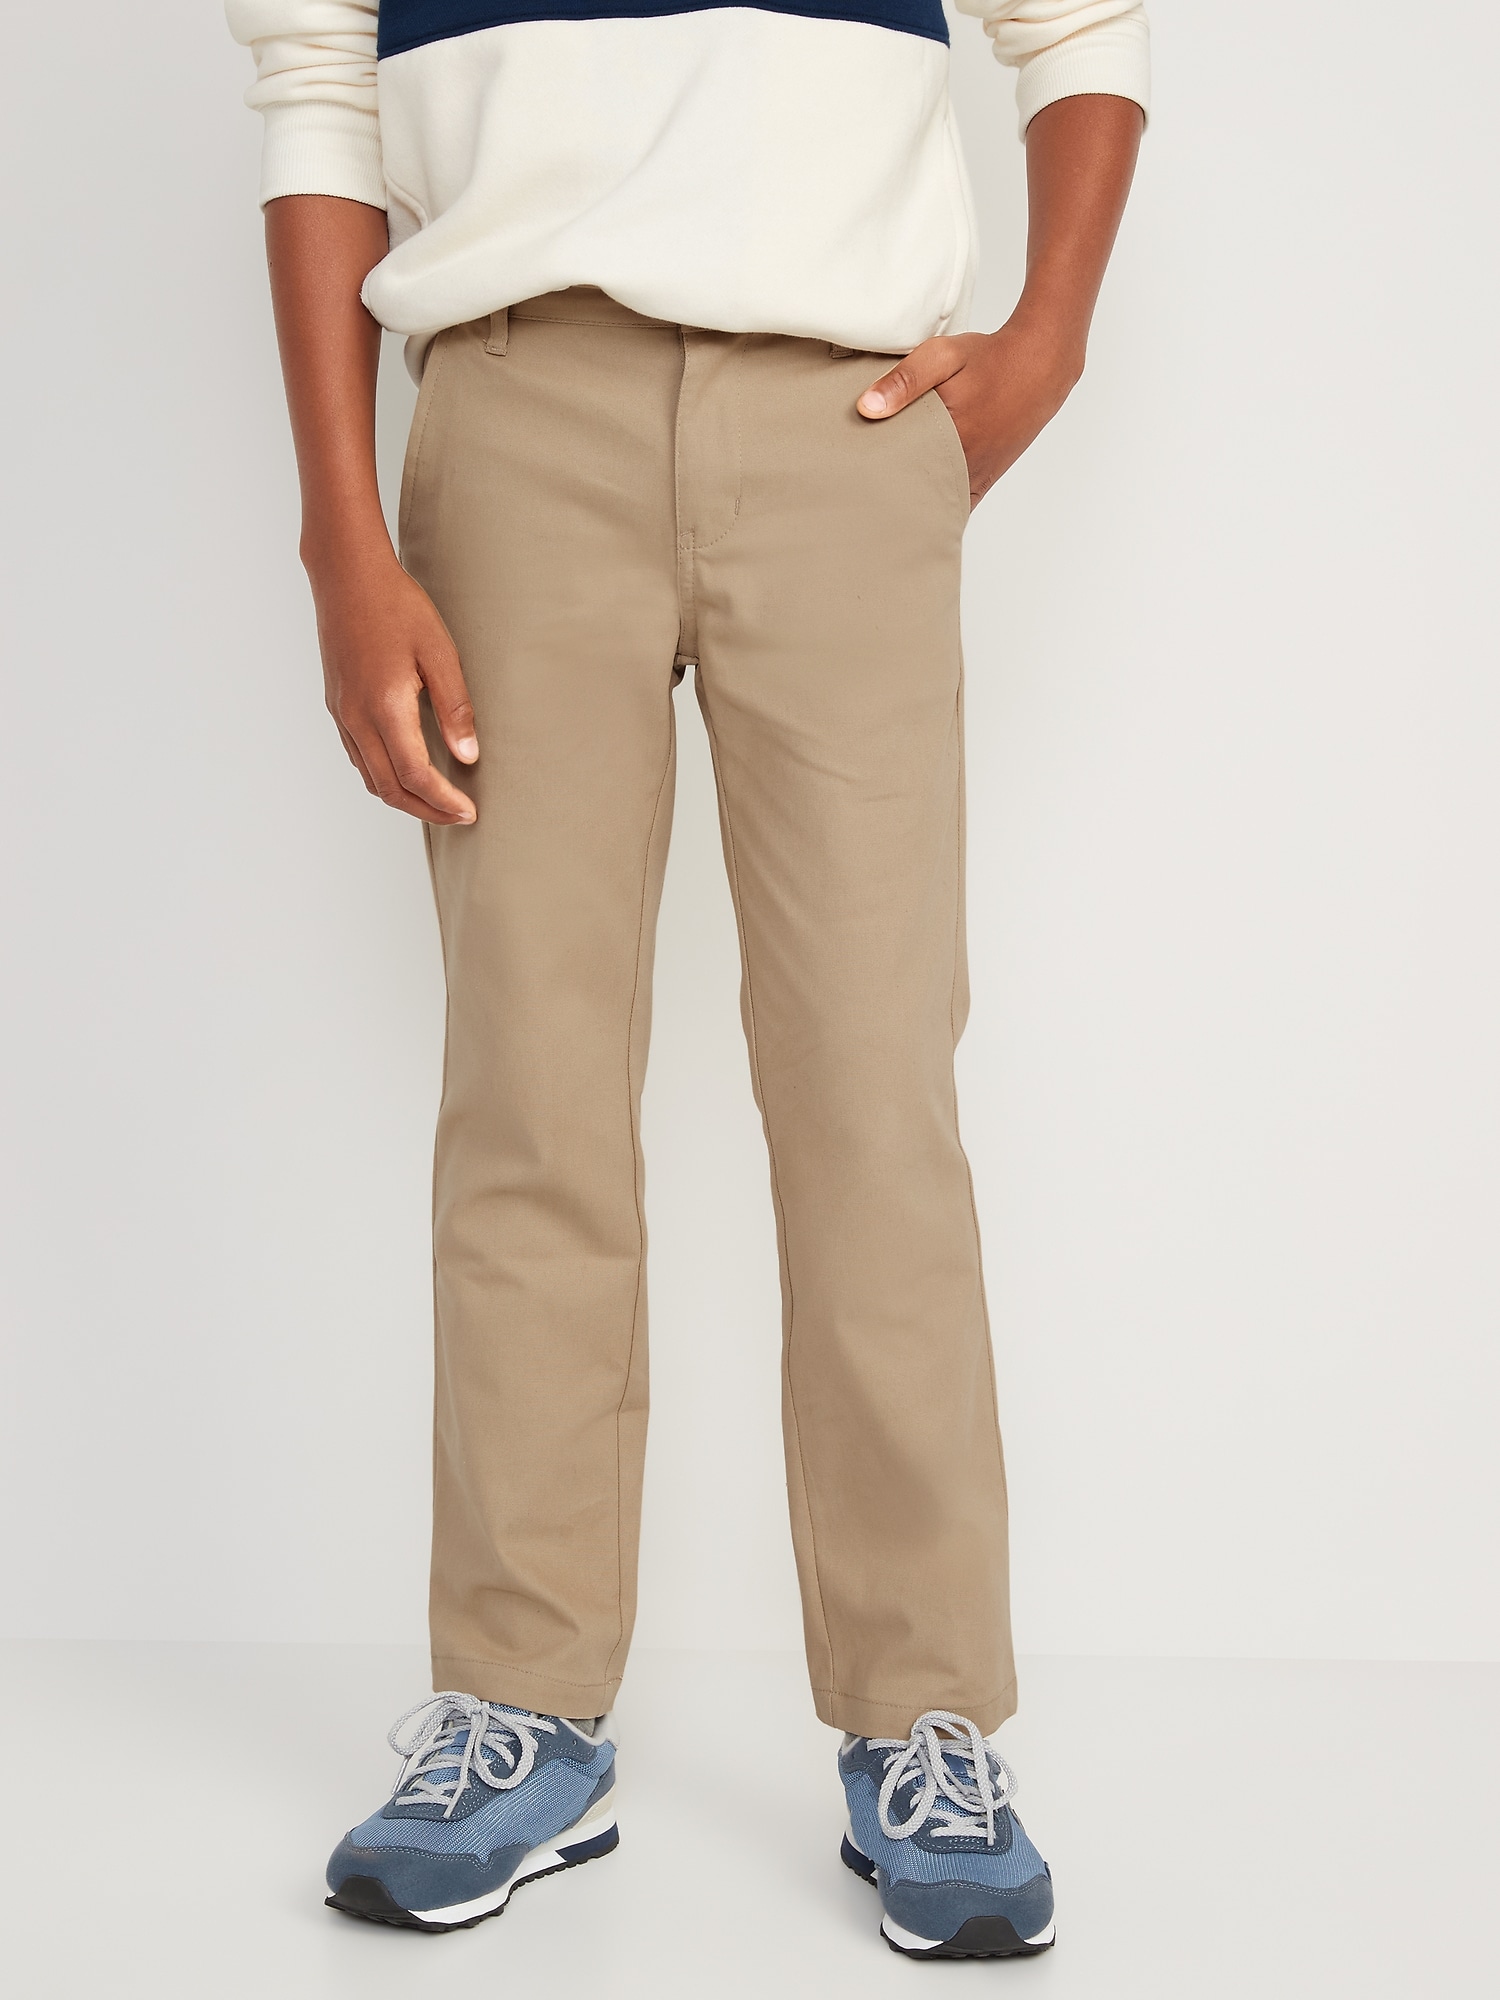 Straight Uniform Pants for Boys | Old Navy